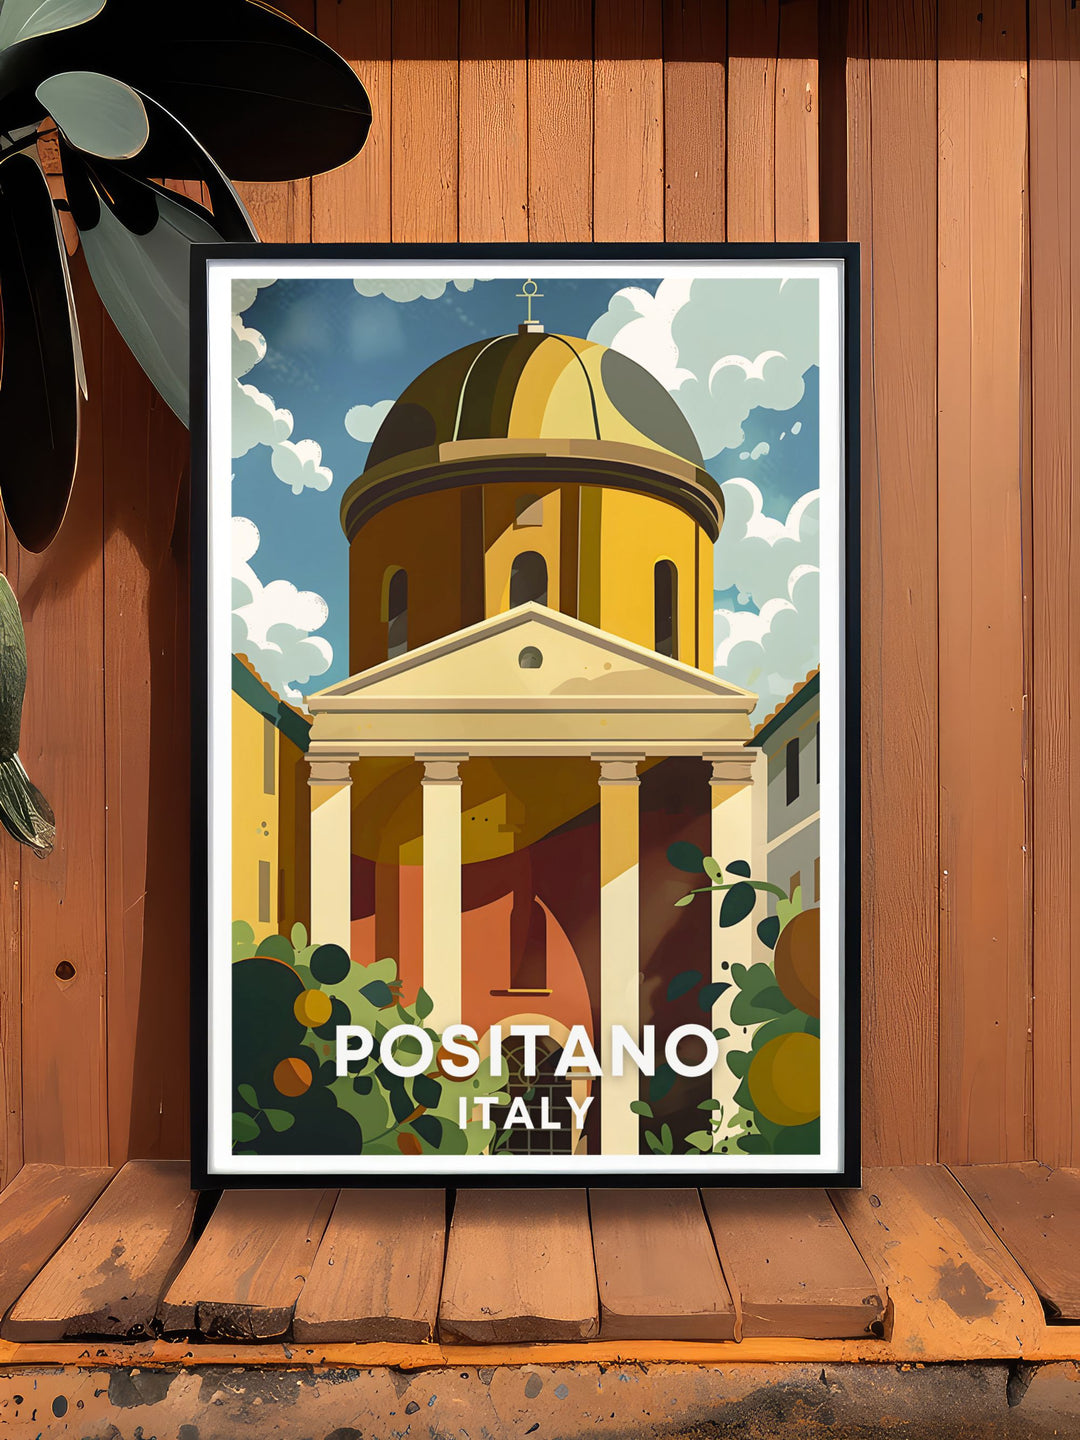 Positano print of The Chiesa di Santa Maria Assunta perfect for home decor this fine print brings the rich history and stunning details of Positano to your walls offering a serene and artistic ambiance to any room